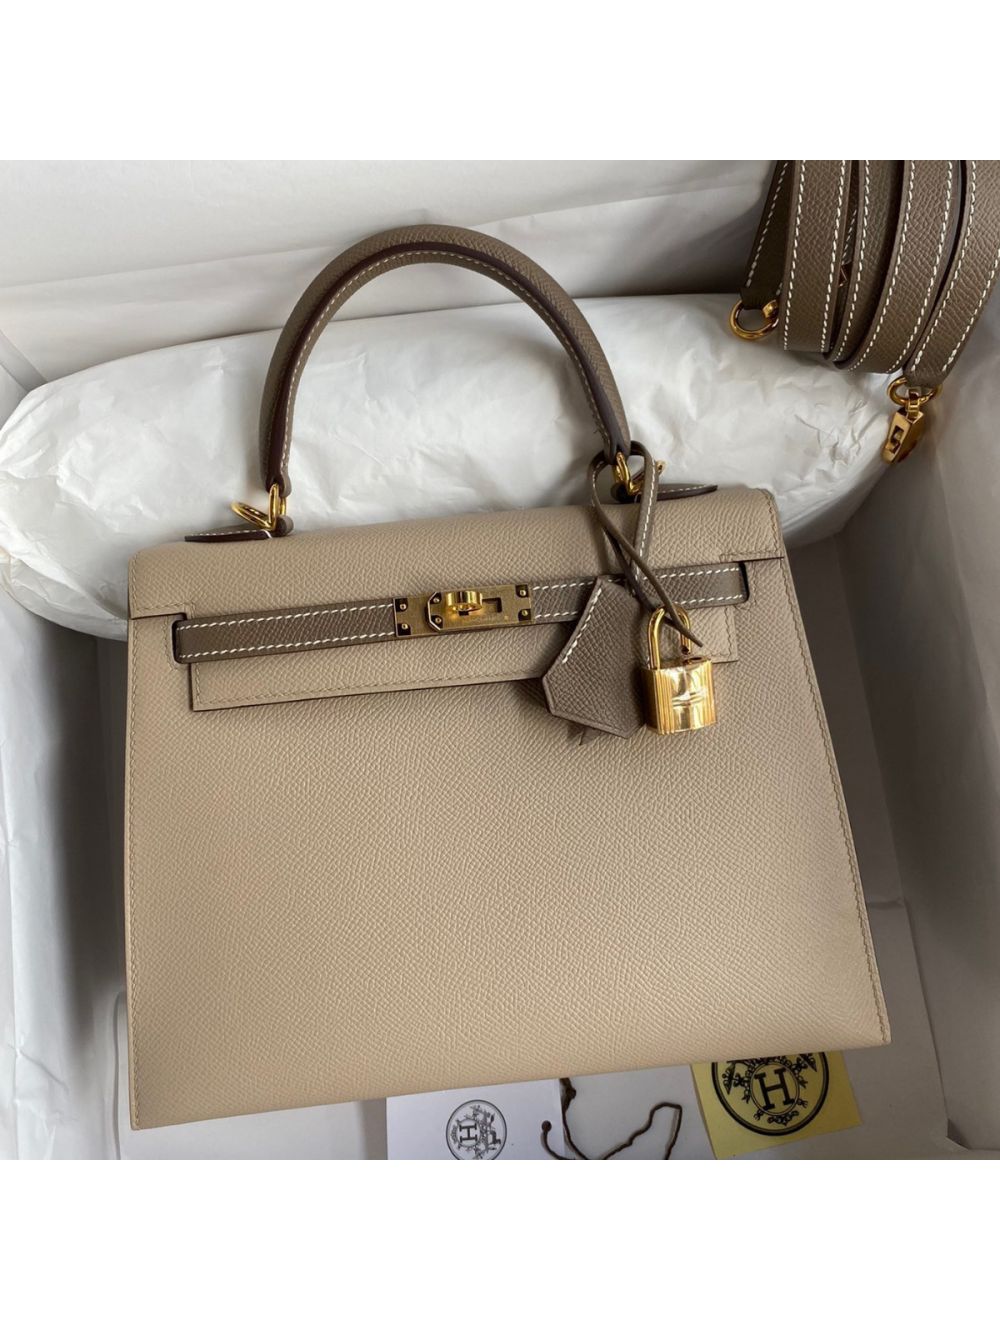 Replica Hermes Kelly Sellier 25 Bicolor Bag in Trench and Taupe Epsom ...